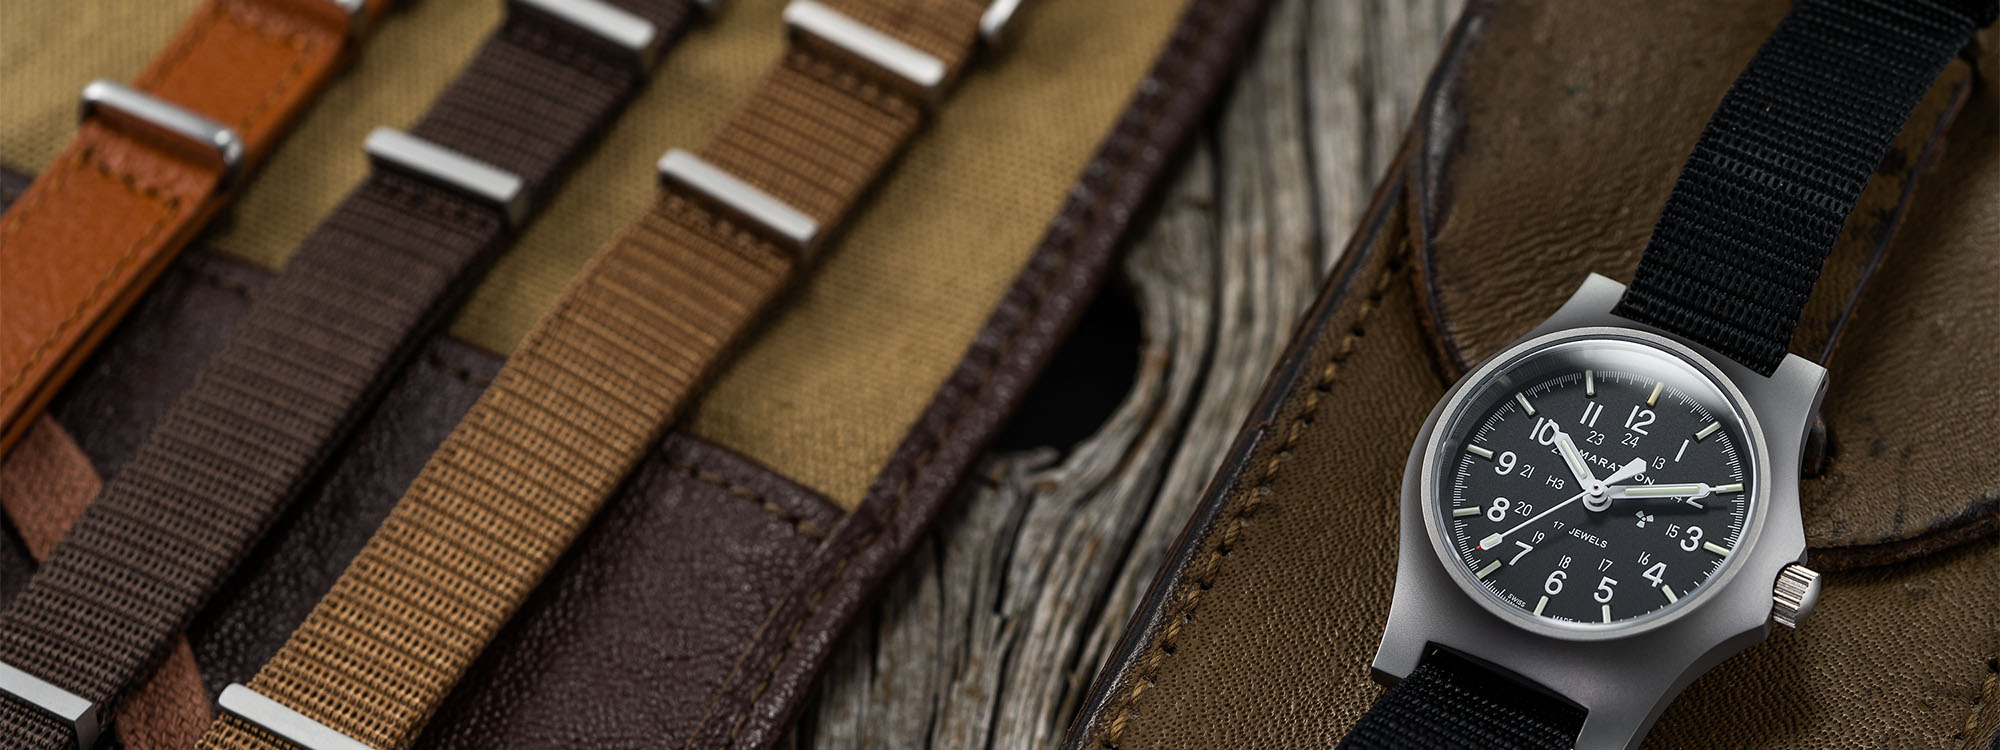 AUTHENTİC WATCH STRAP  Repurposed Authentic strap and custom